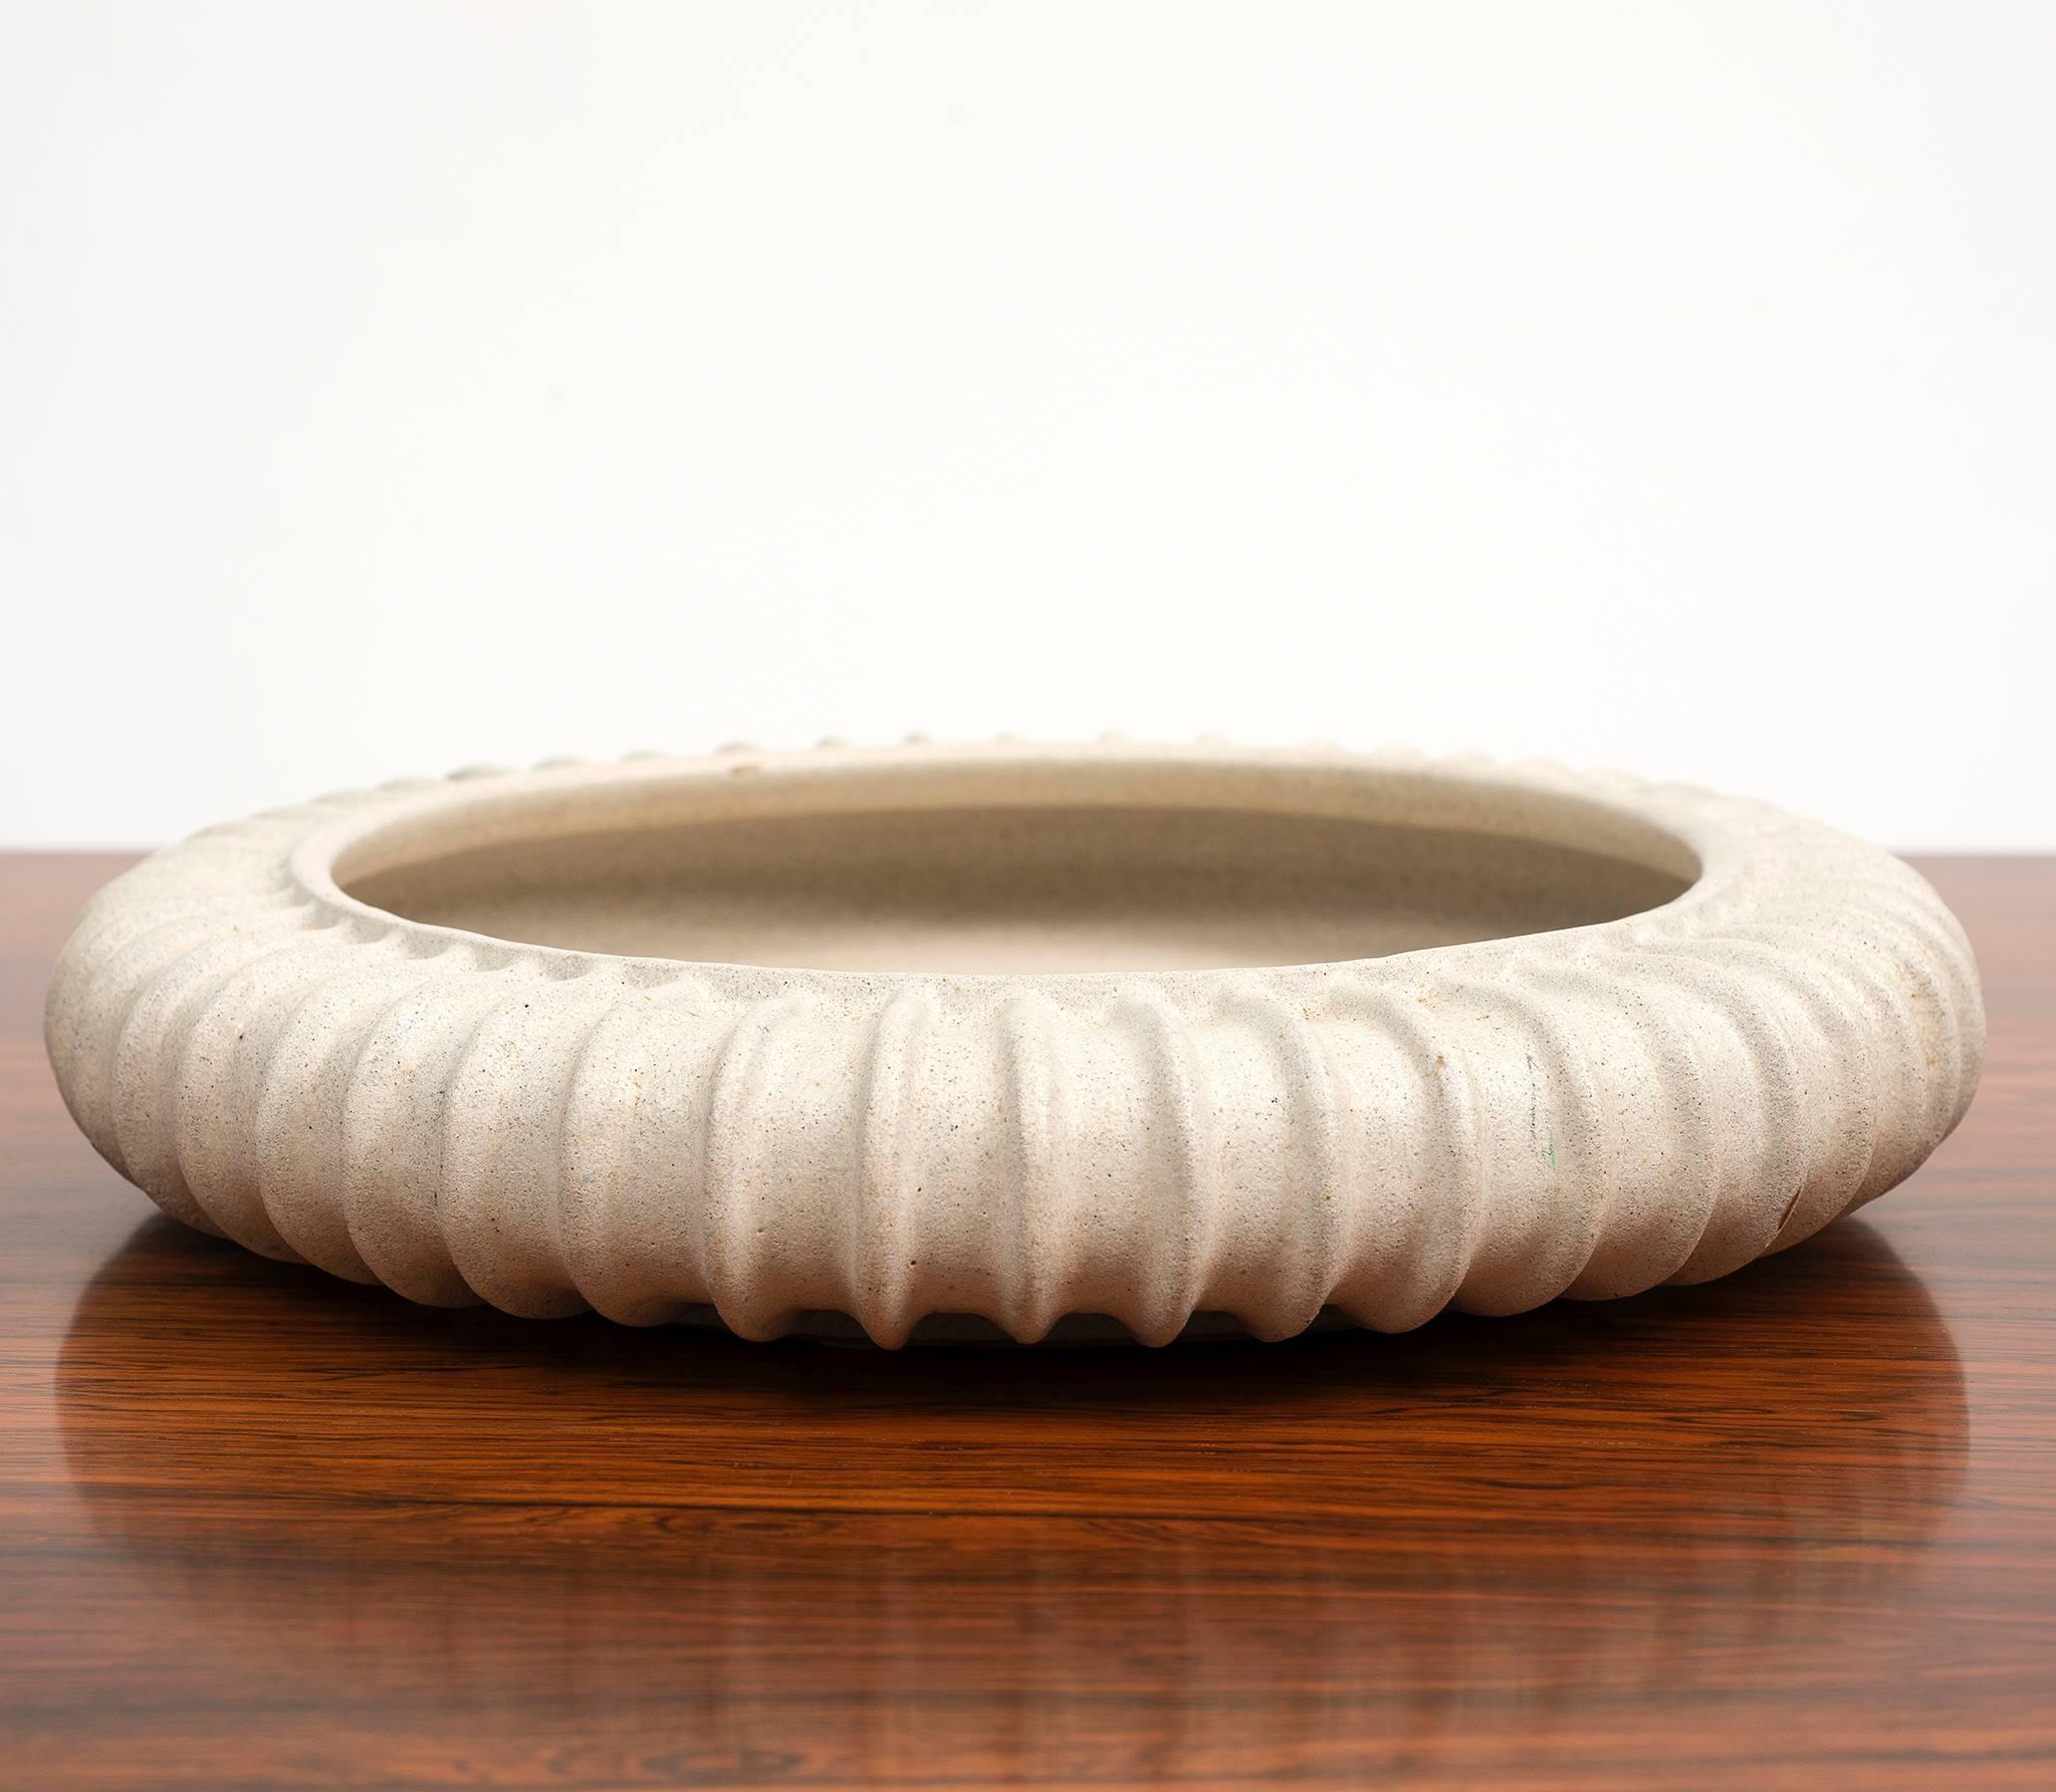 Large circular stoneware dish by Arne Bang with fluted exterior in a bisque glaze, Denmark, 1940s.